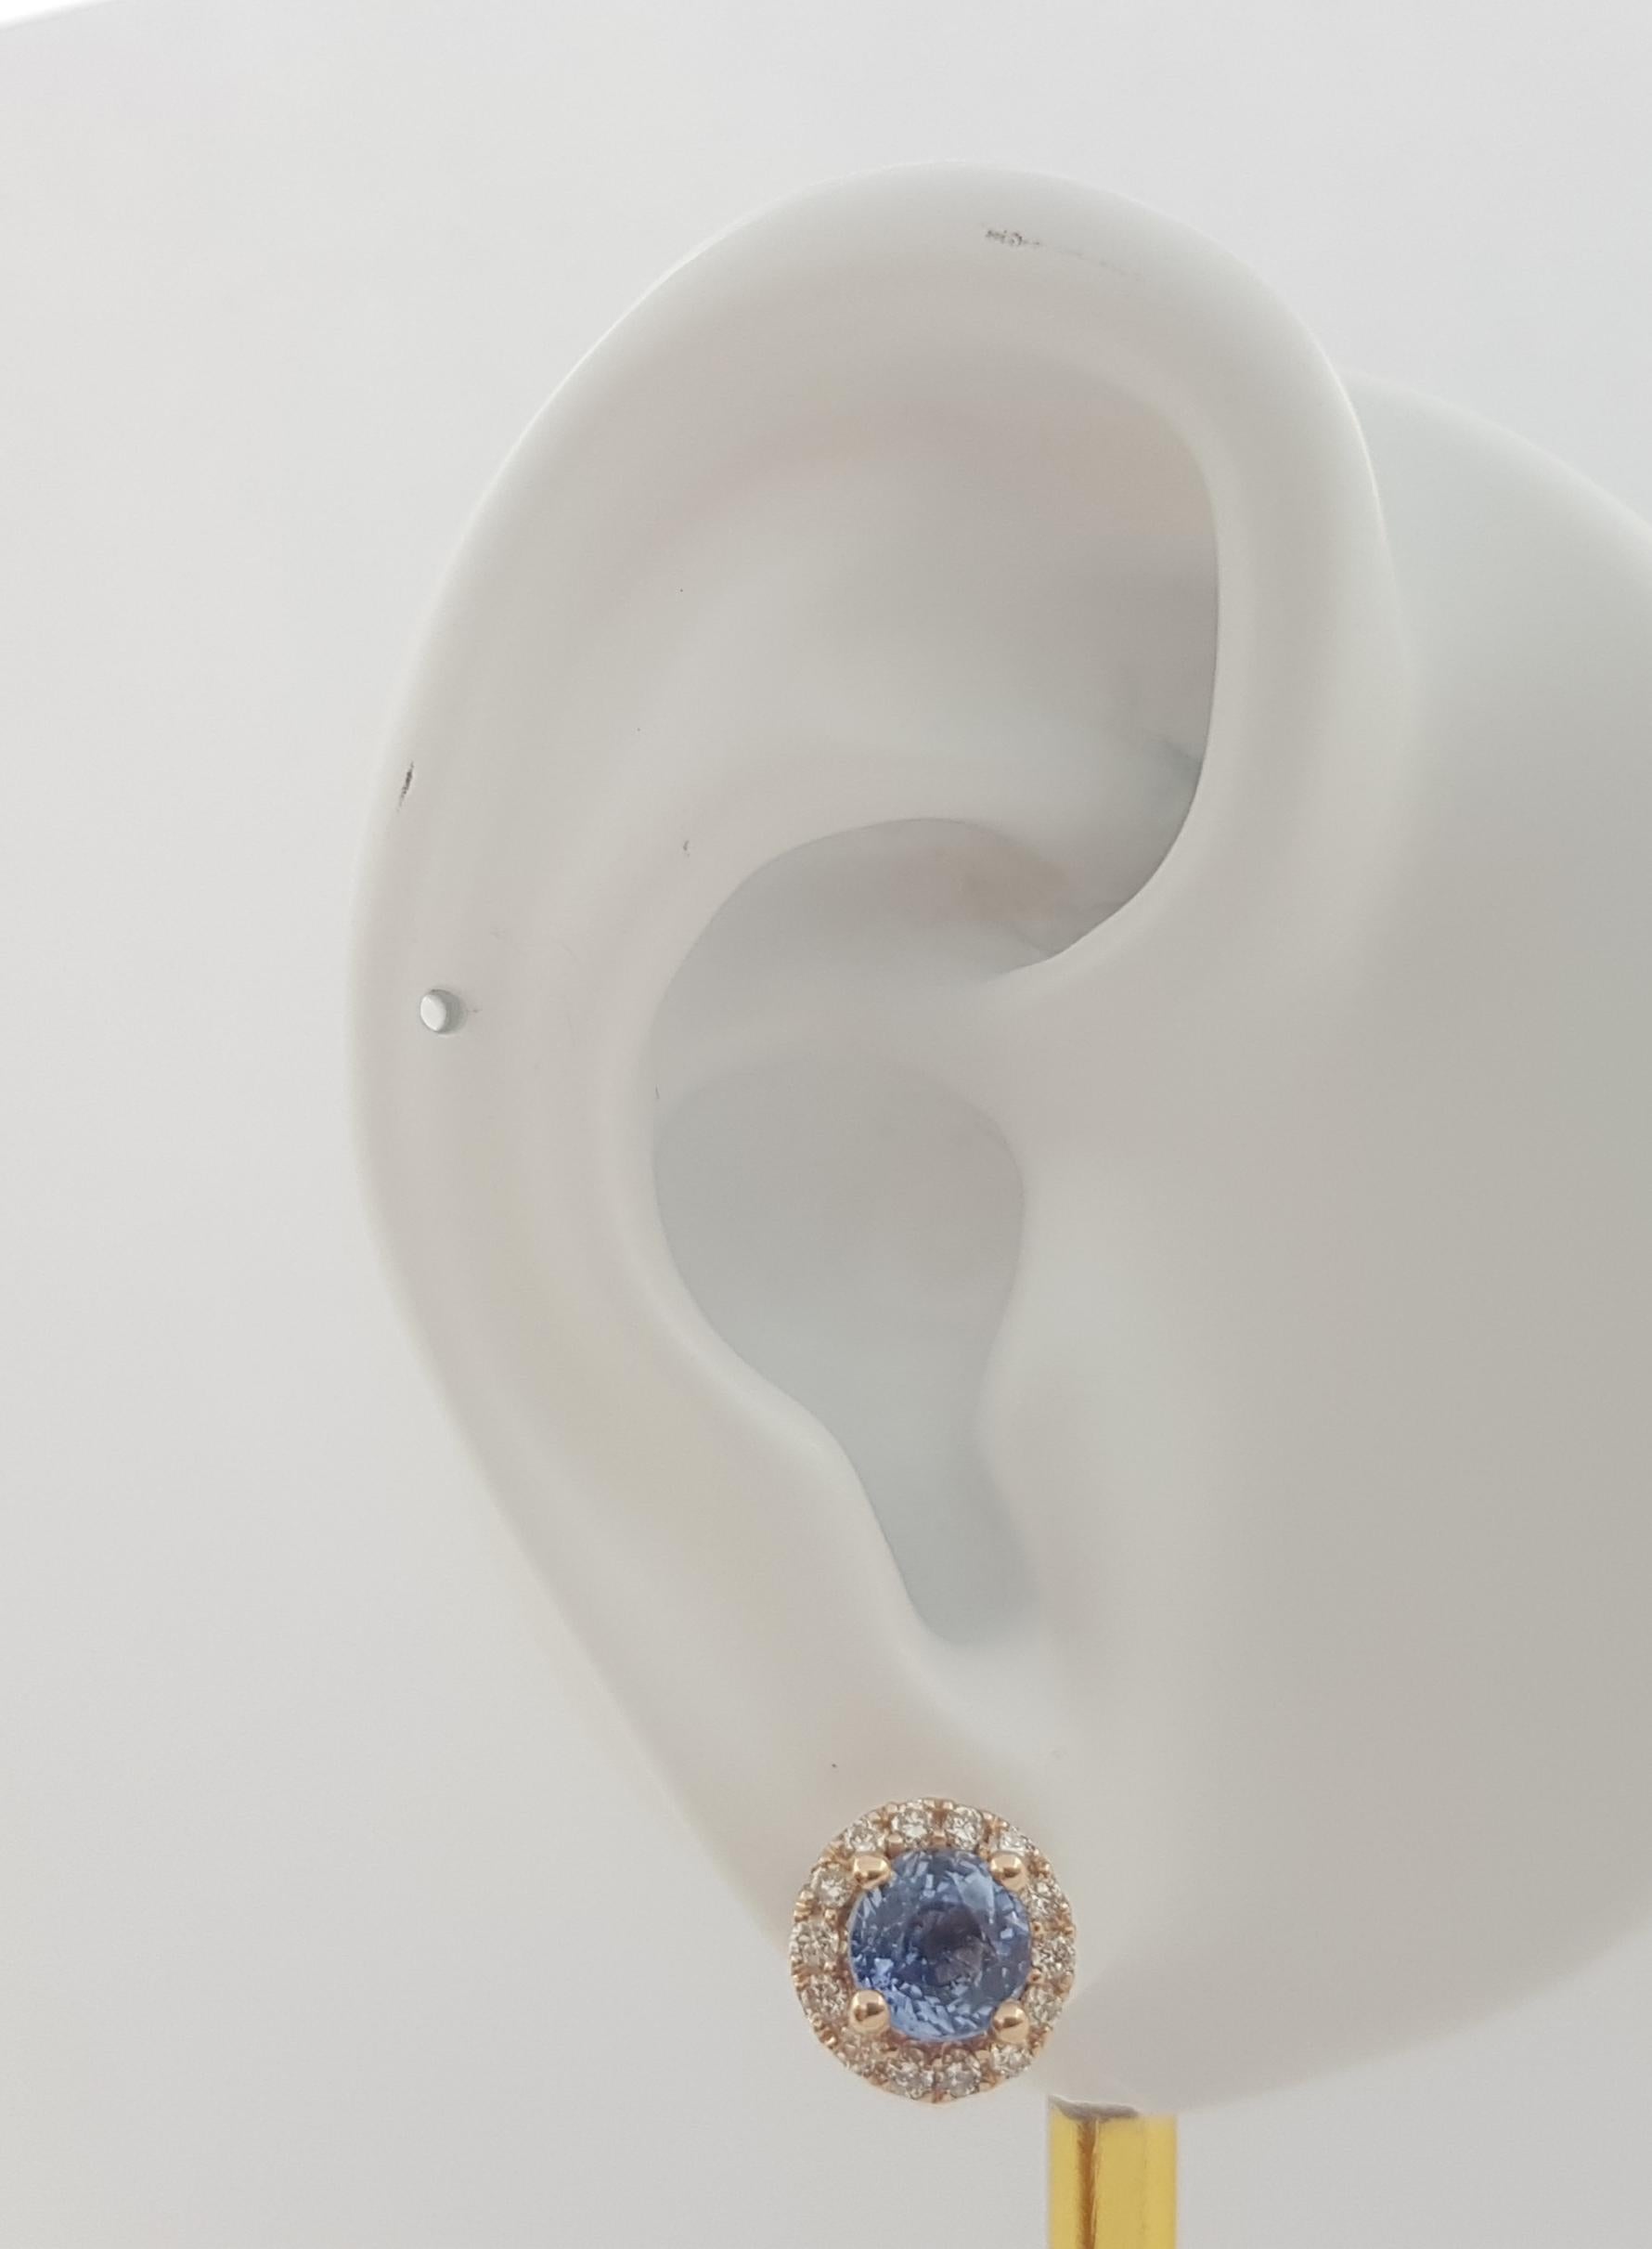 Blue Sapphire 2.03 carats with Diamond 0.38 carat Earrings set in 18K Rose Gold Settings

Width: 0.9 cm 
Length: 0.9 cm
Total Weight: 3.41 grams

